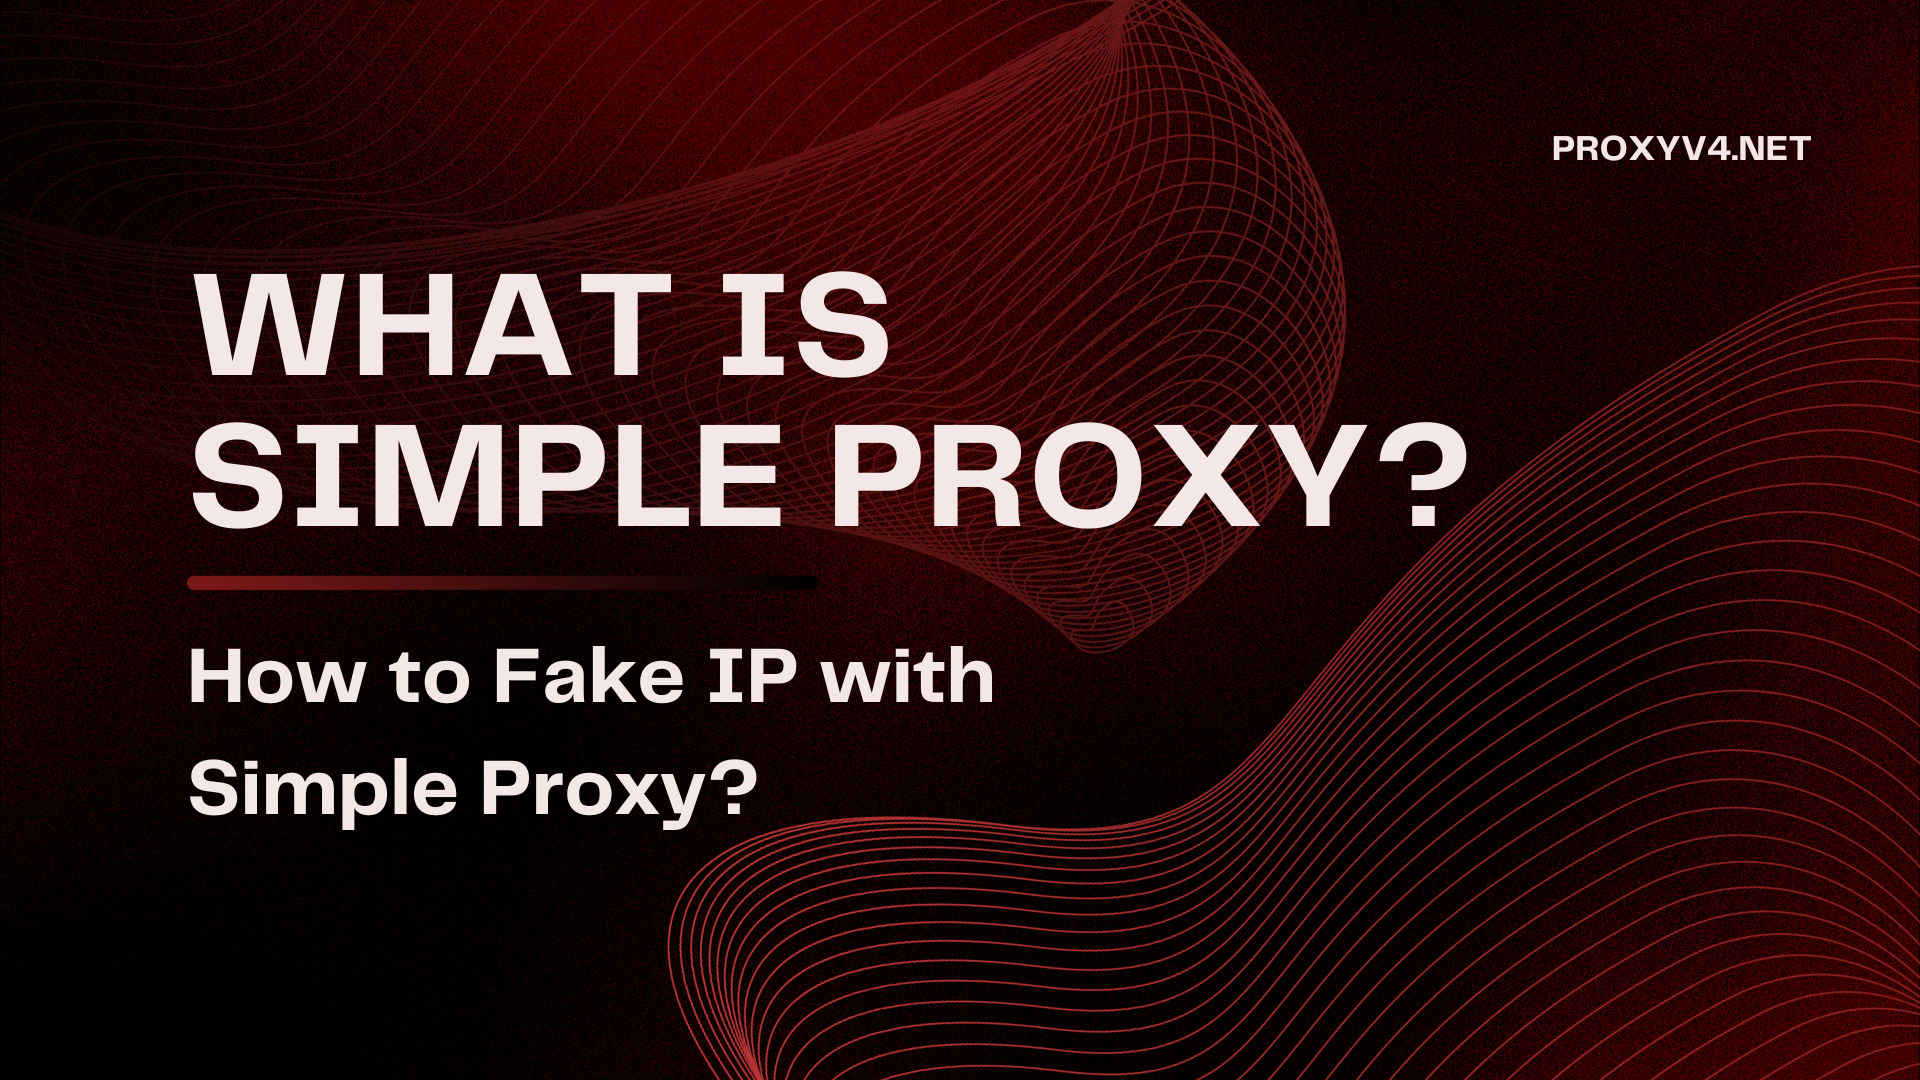 What is Simple Proxy? How to Fake IP with Simple Proxy?